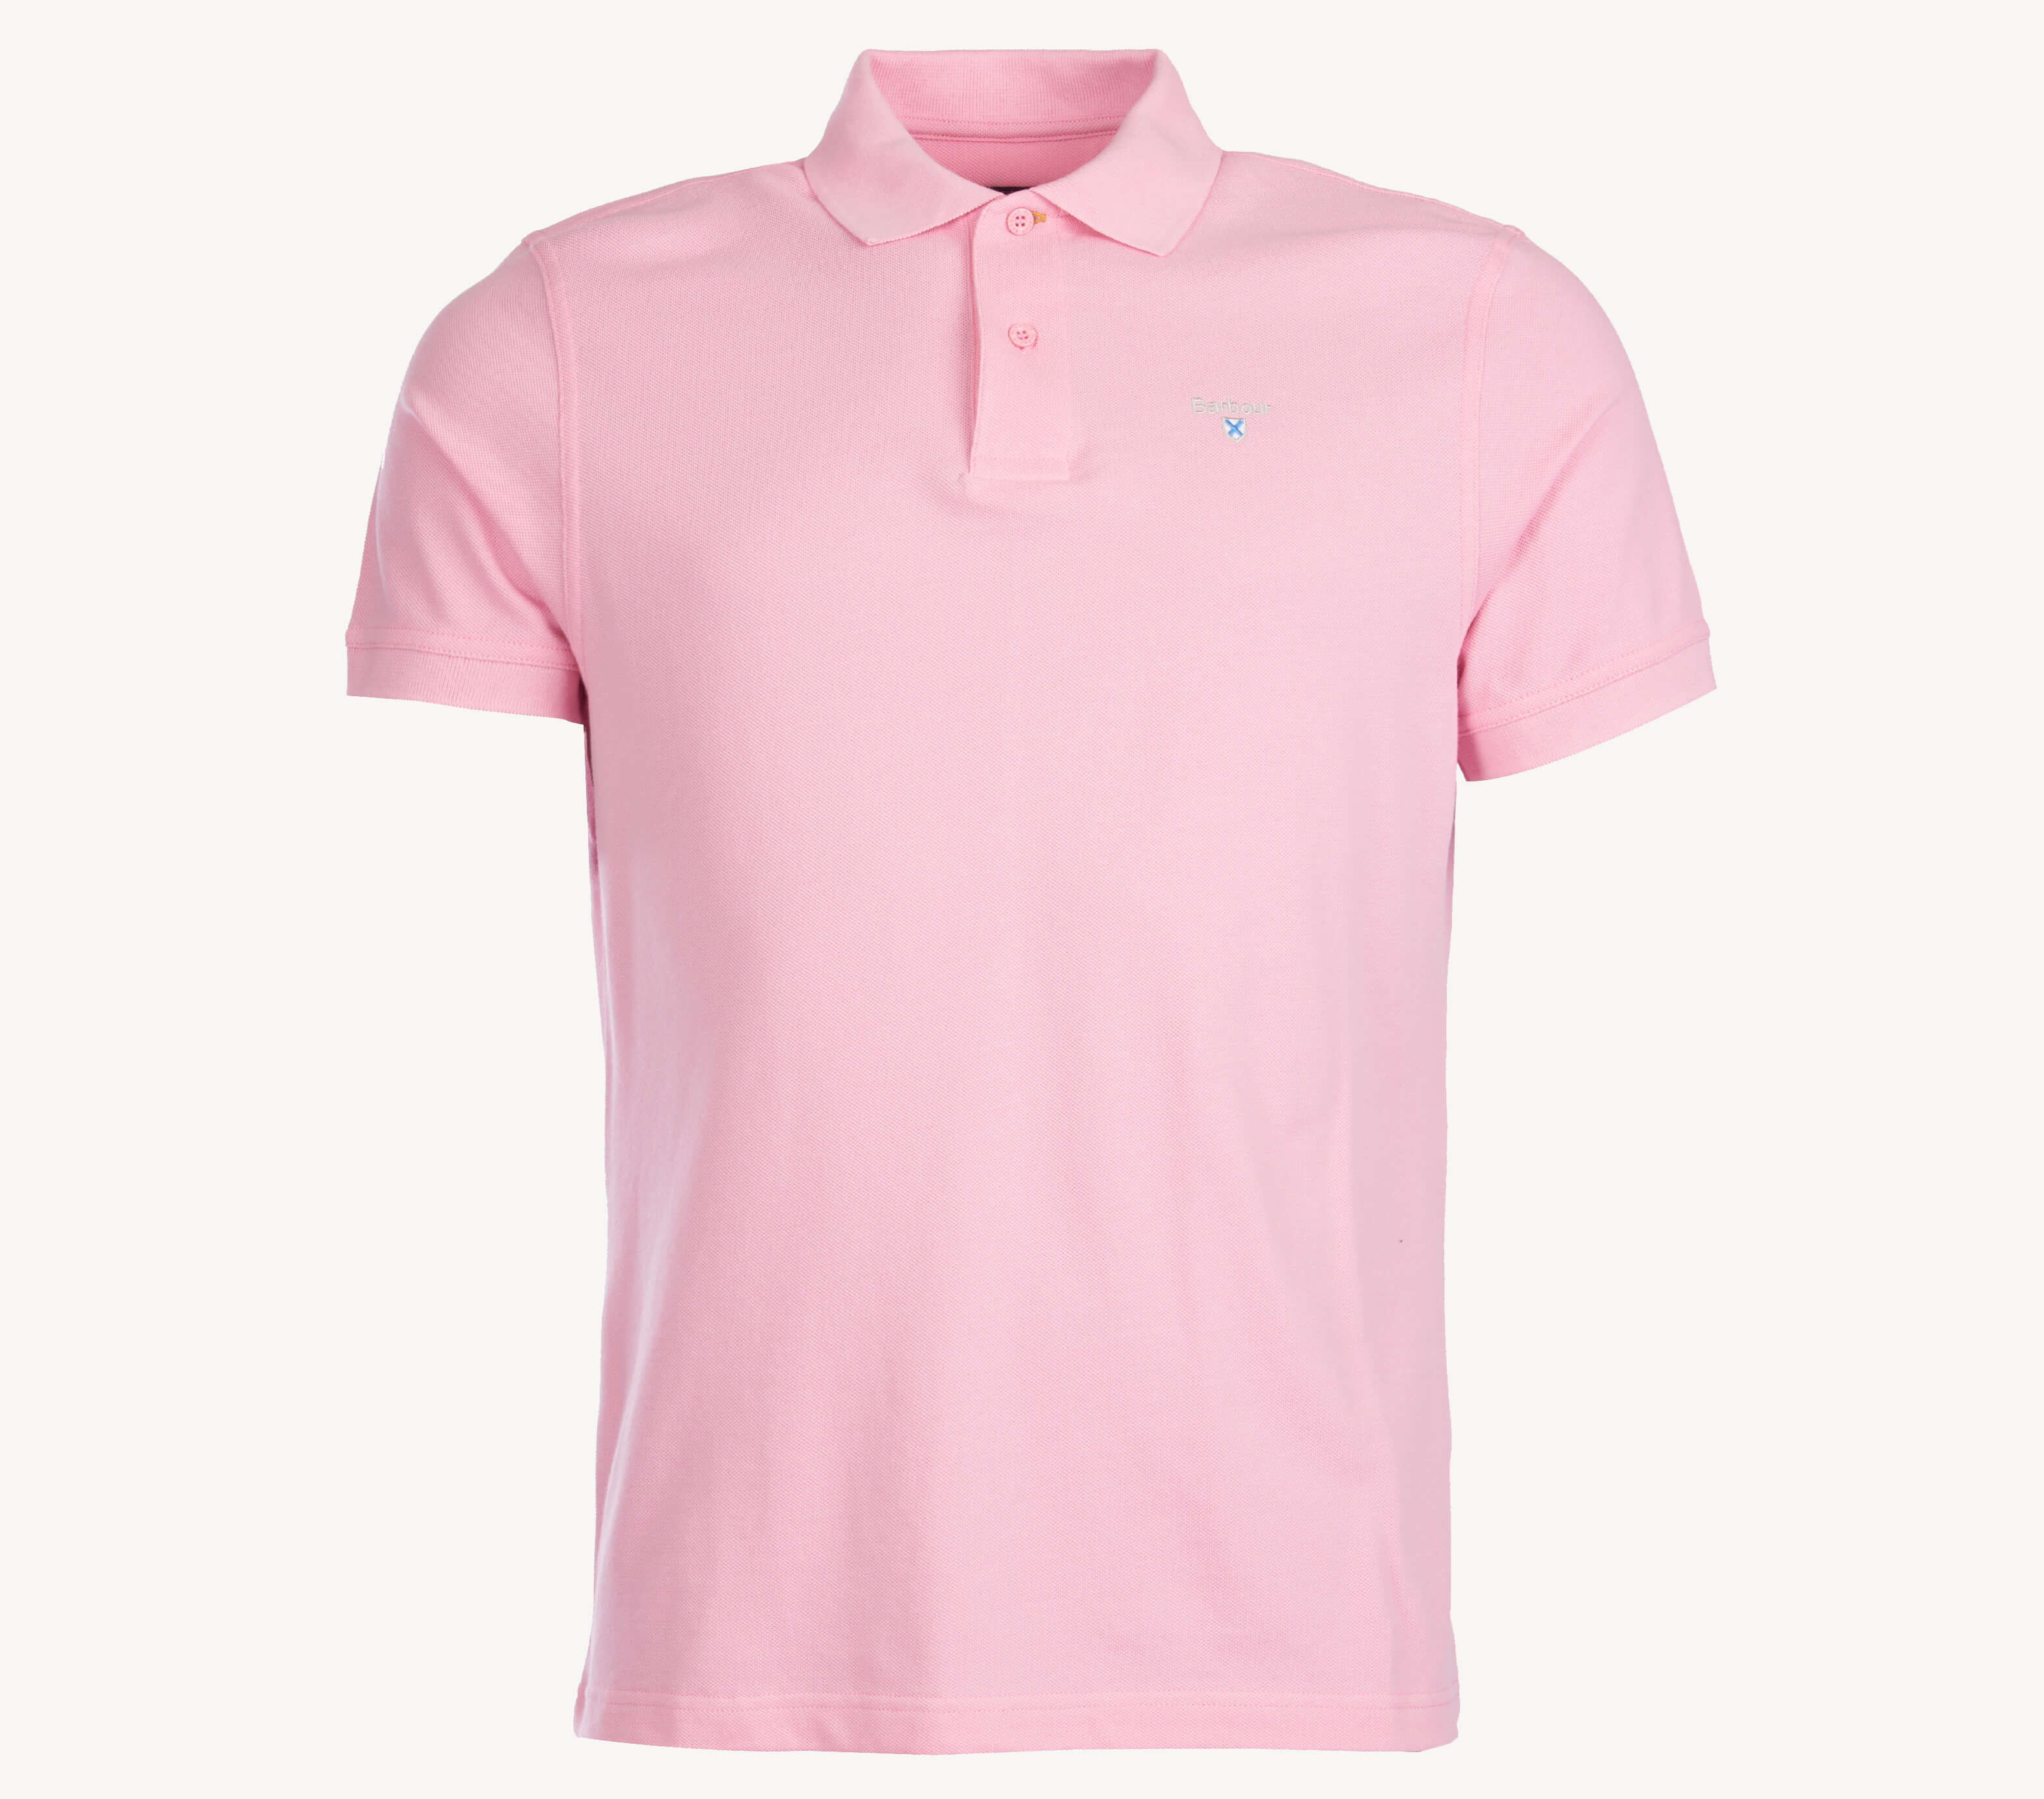 The Sports Polo